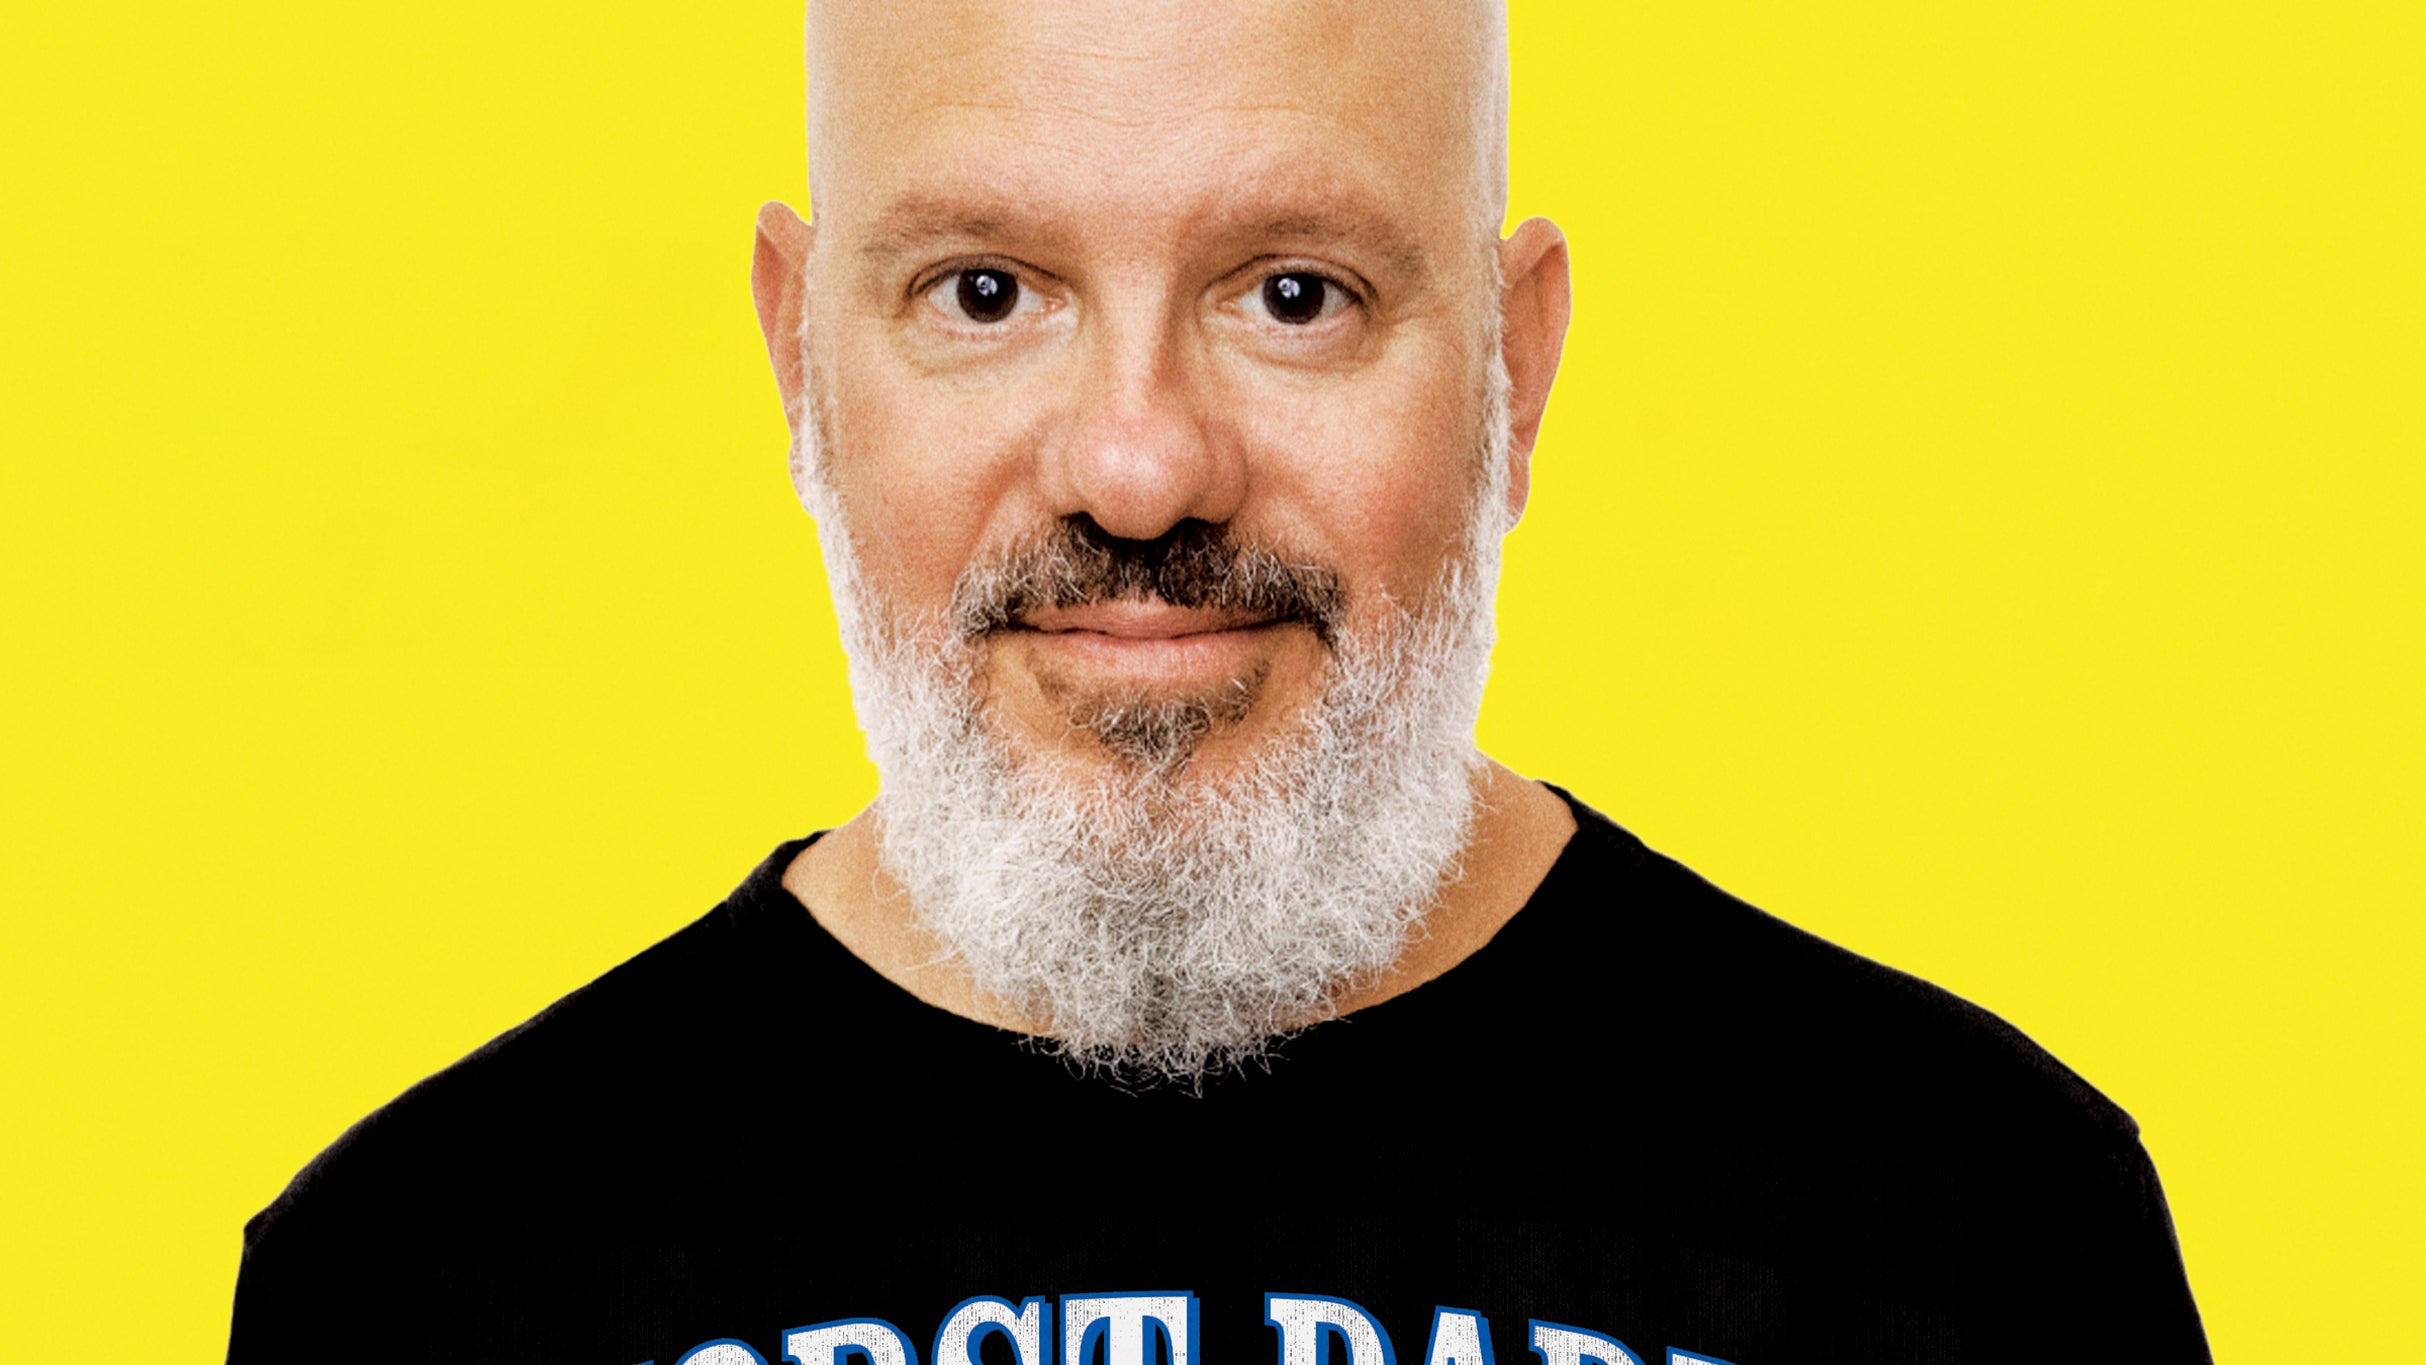 exclusive presale passcode for David Cross presale tickets in Poughkeepsie at Bardavon 1869 Opera House